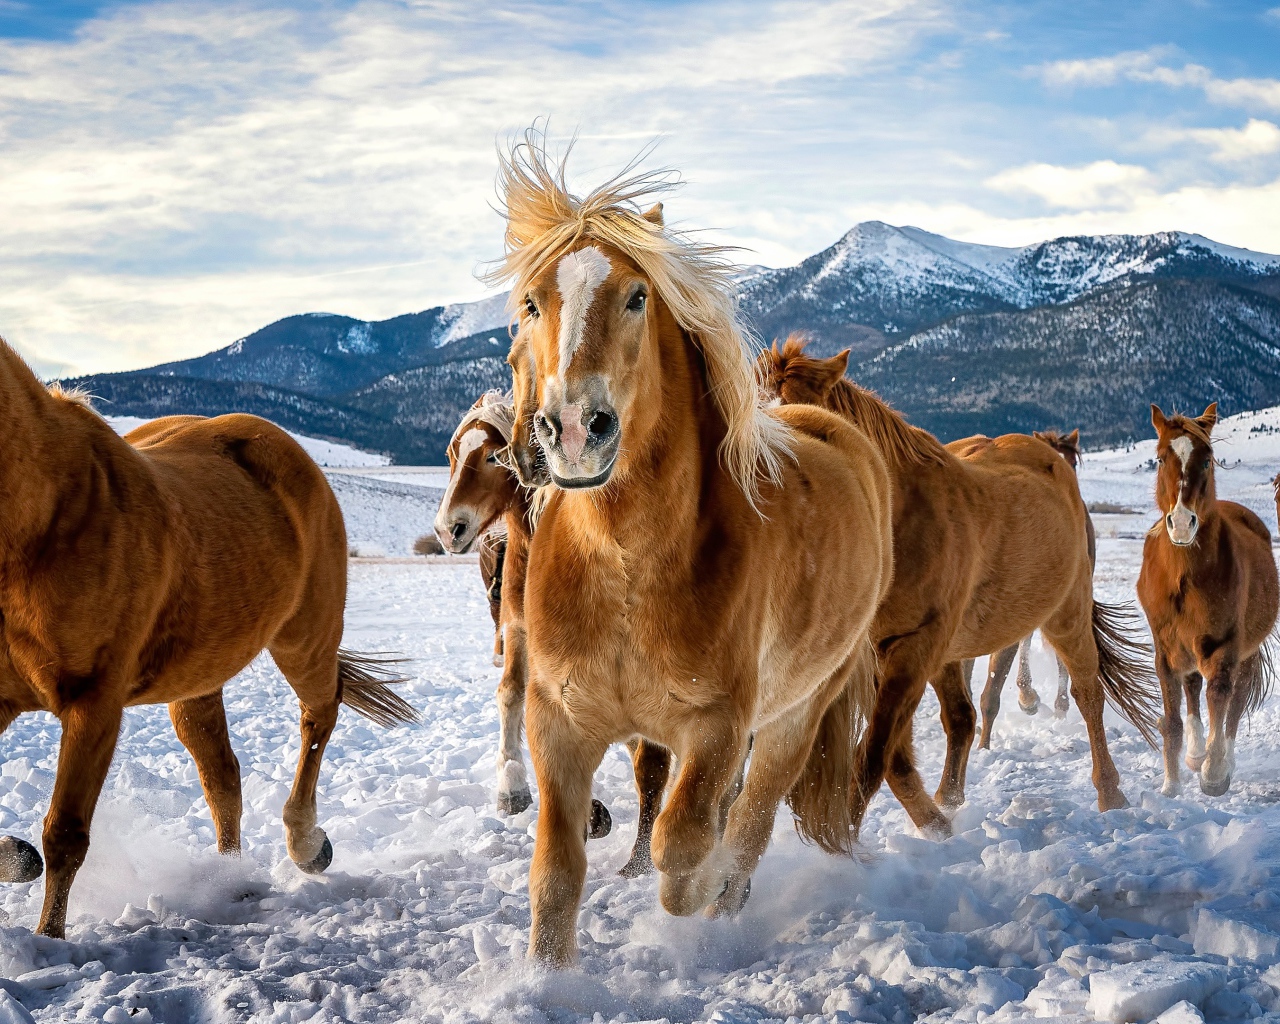 Herd of brown horses galloping in the snow in the mountains